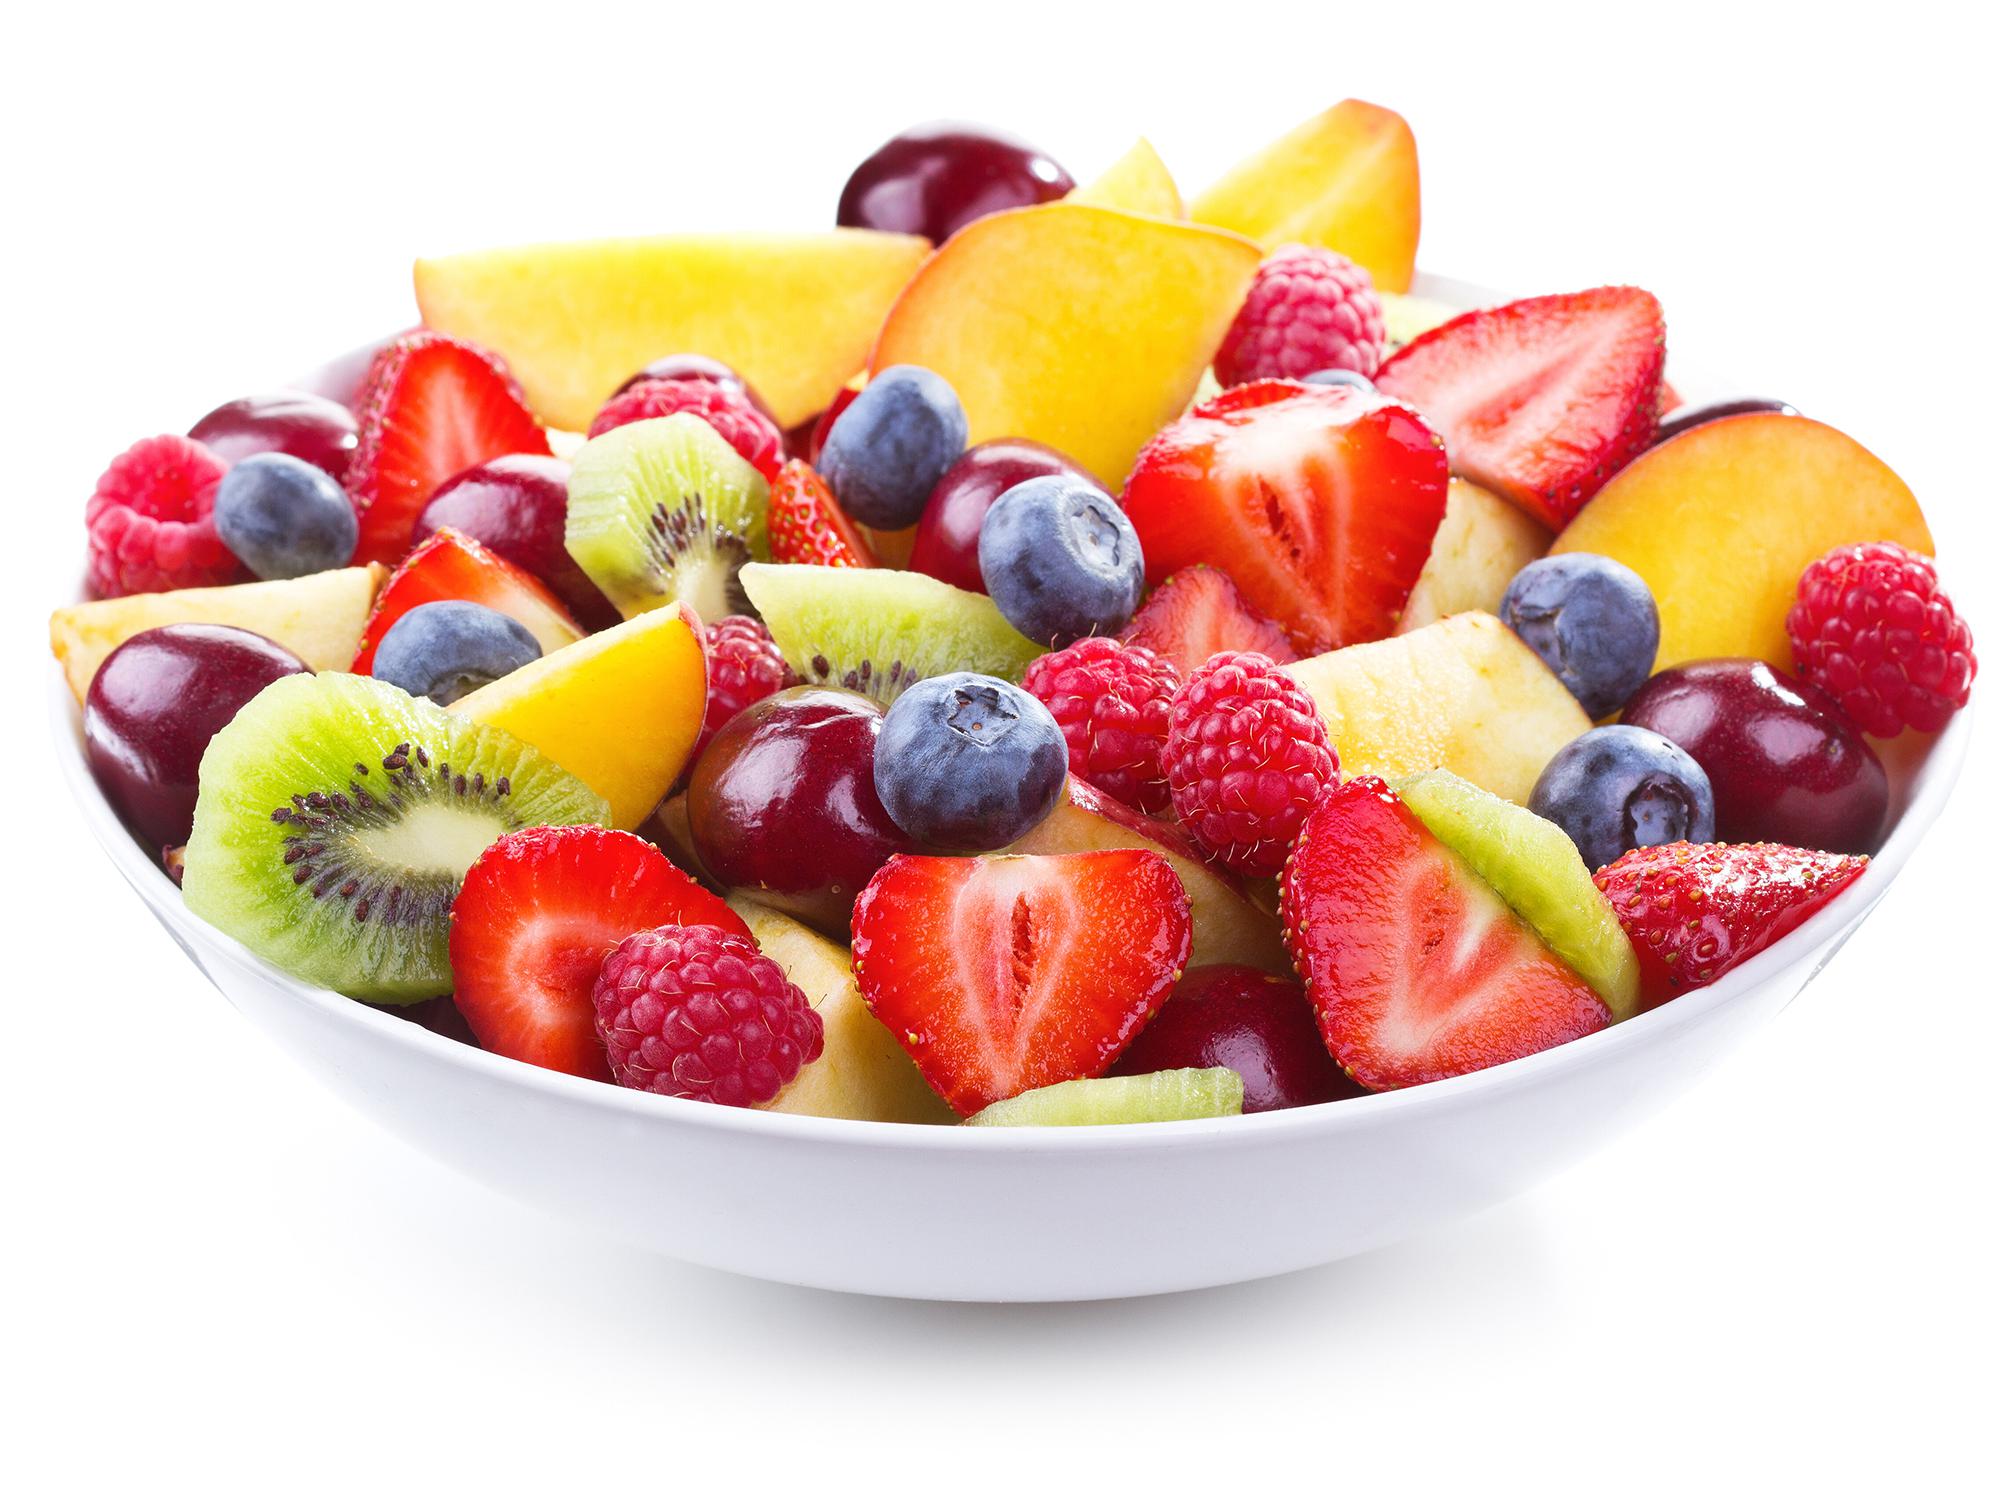 A white bowl of mixed chopped fresh fruits and berries on white background.